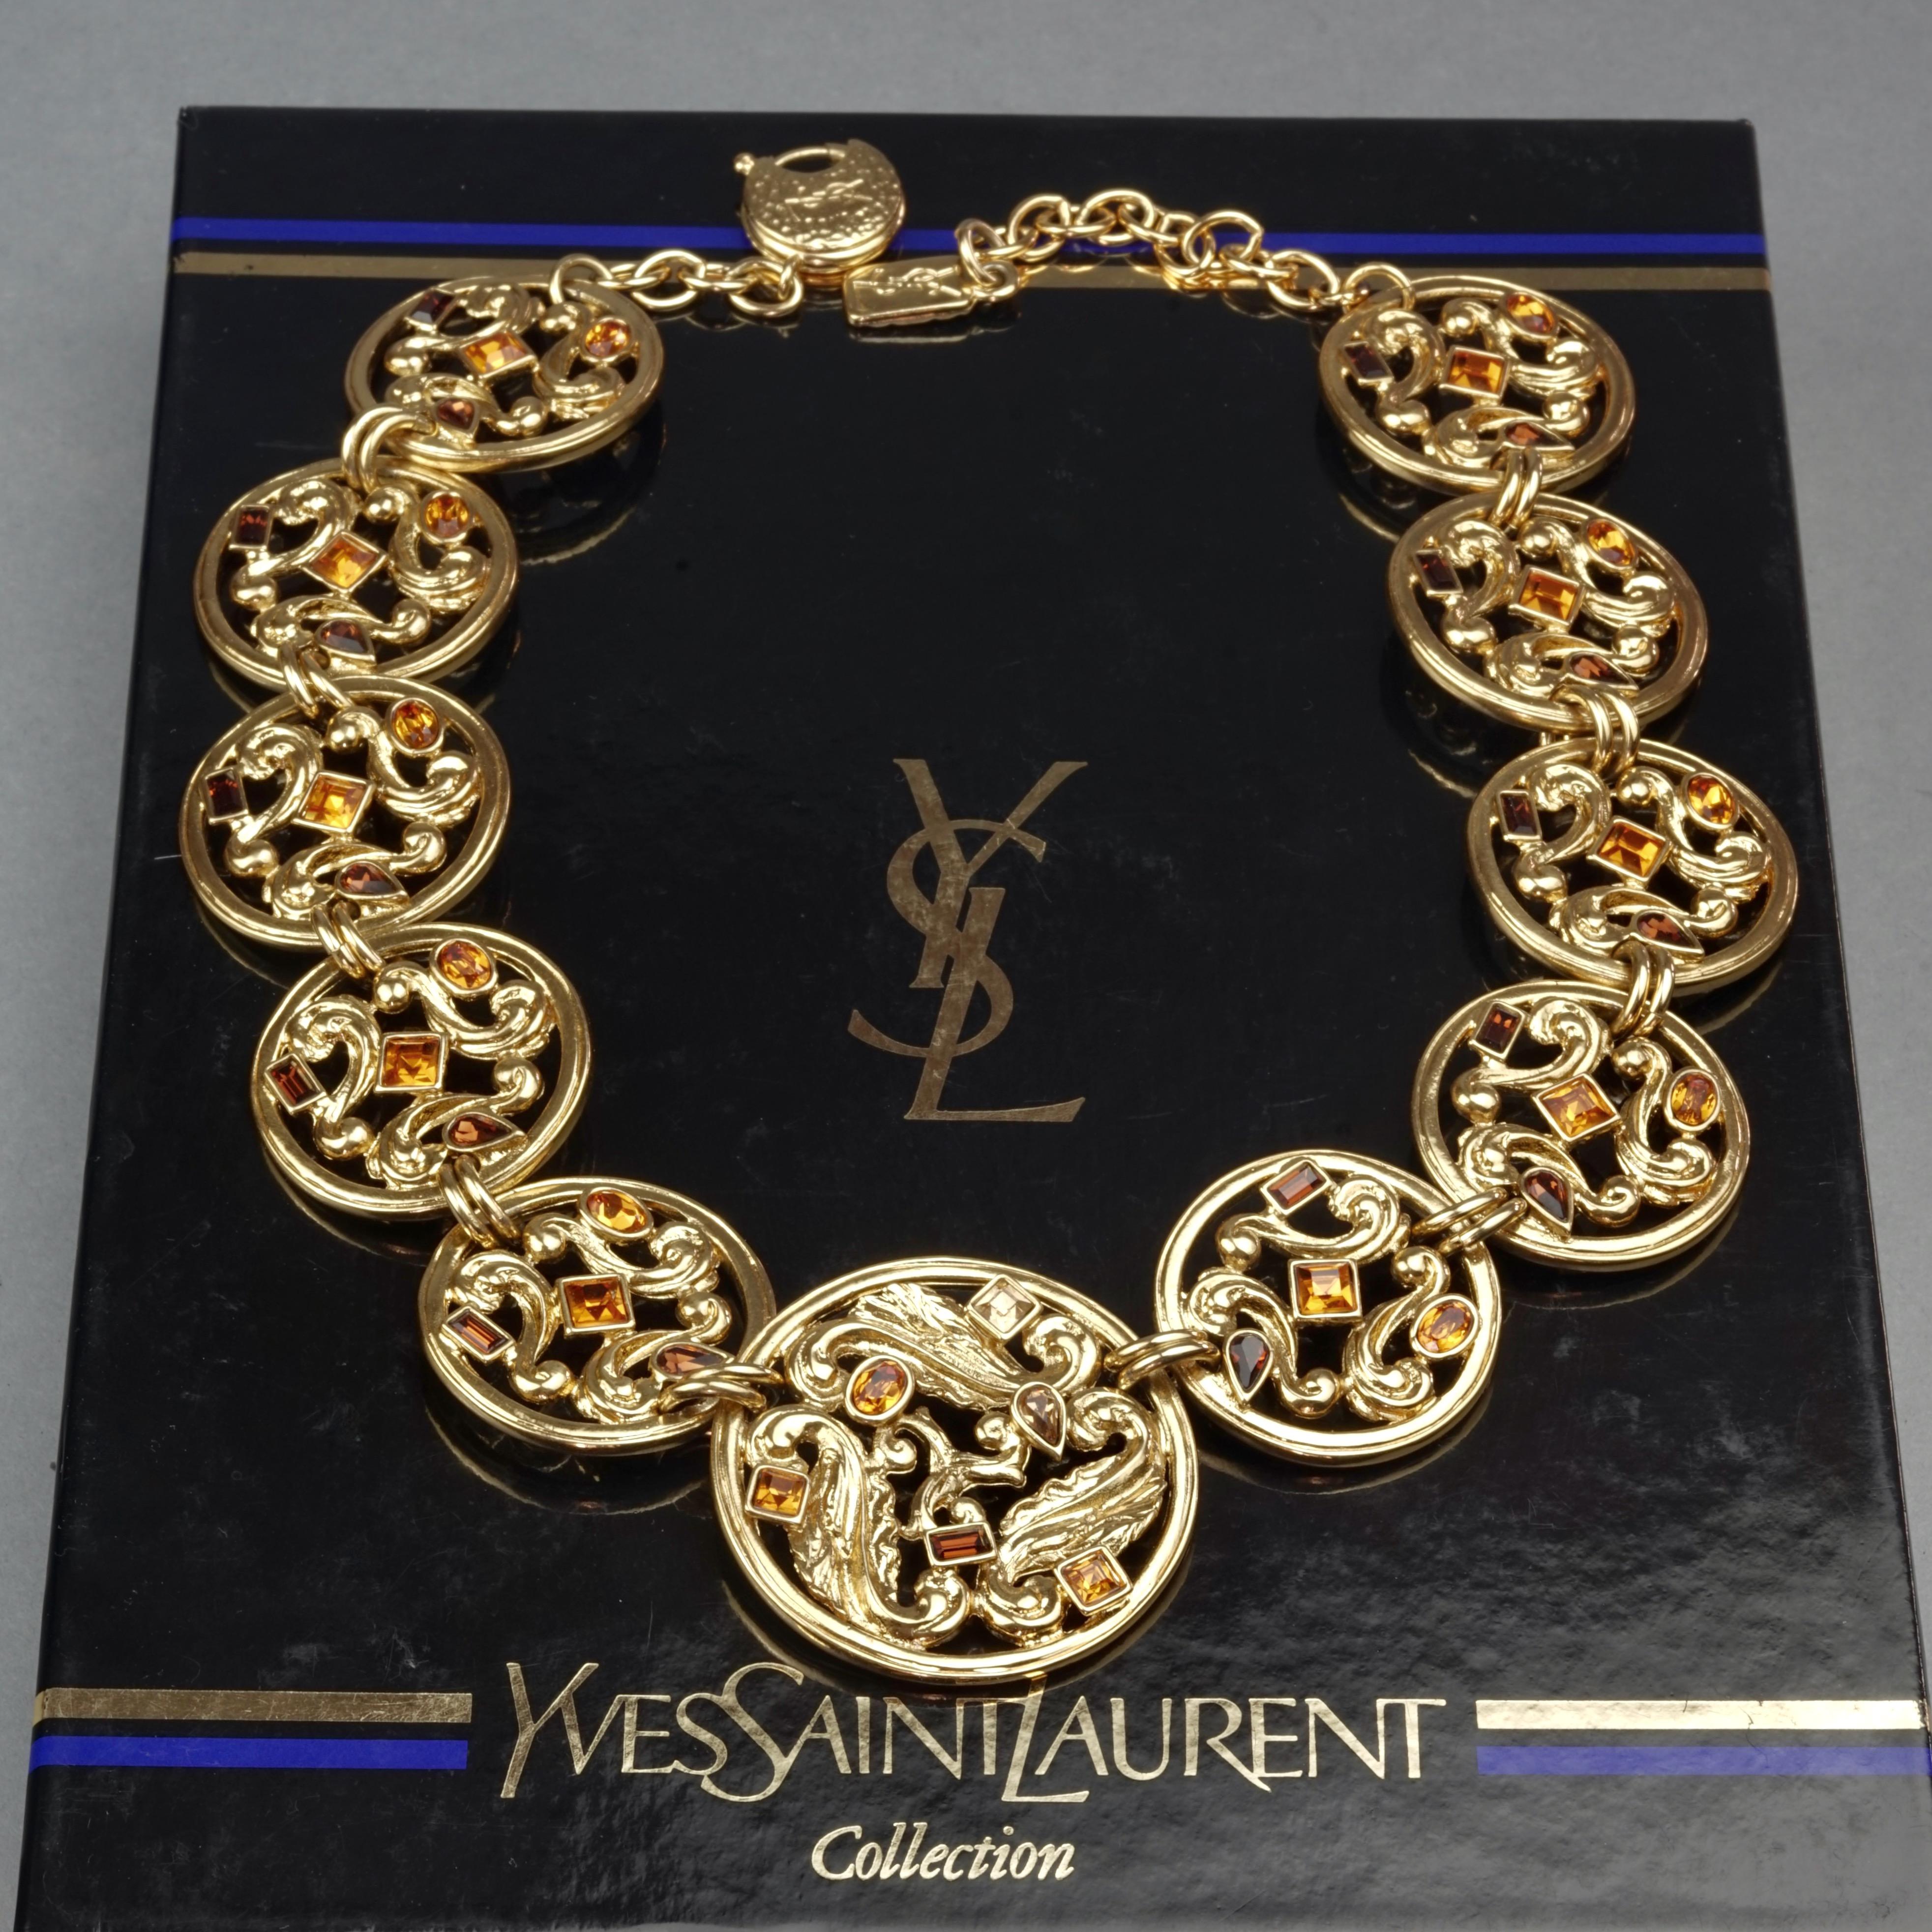 Vintage YVES SAINT LAURENT Ysl Jewelled Round Filigree Disc Necklace

Measurements:
Height: 1.81 inches (4.6 cm)
Width: 17.71 inches (45 cm) to 19.68 inches (50 cm)

Features:
- 100% Authentic YVES SAINT LAURENT.
- Openwork medallion links with